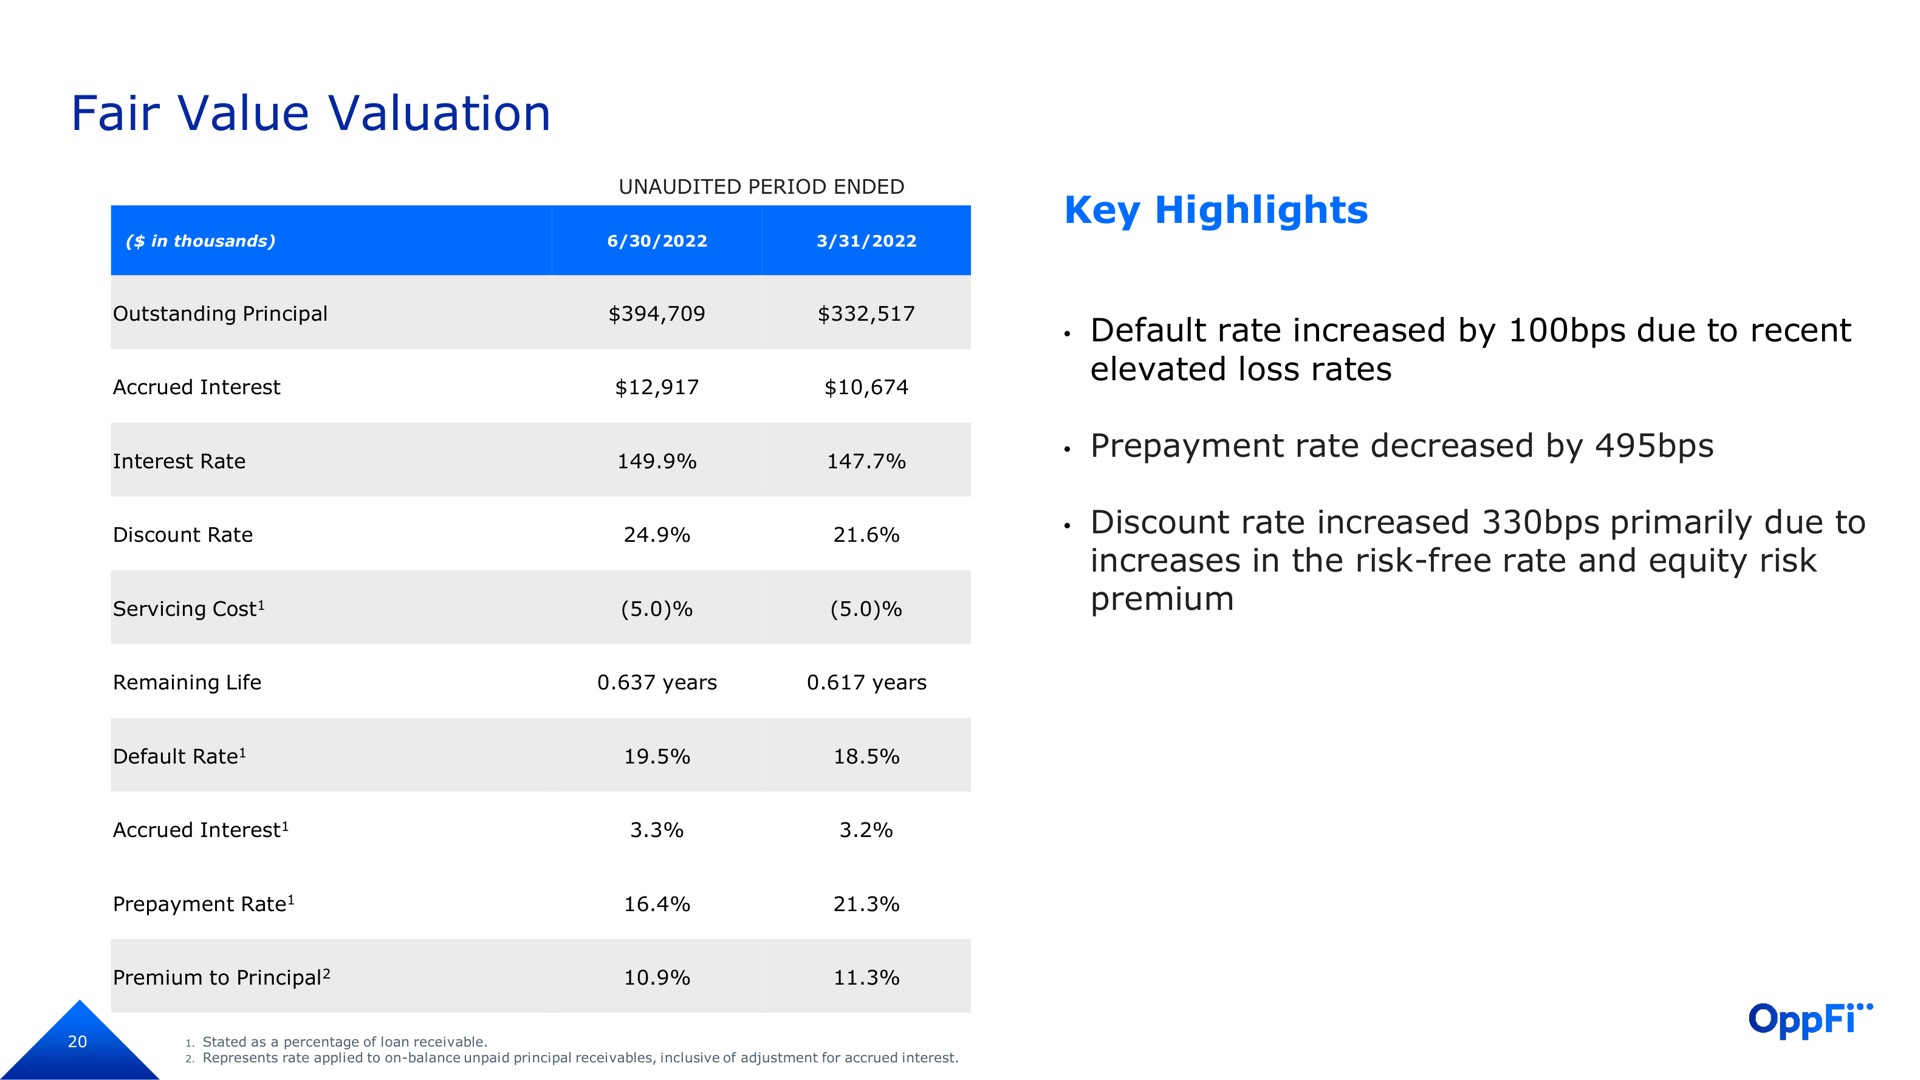 fair value valuation key highlights default rate increased by due to recent elevated loss rates prepayment rate decreased by discount rate increased primarily due to increases in the risk free rate and equity risk premium interest bate servicing cost | OppFi